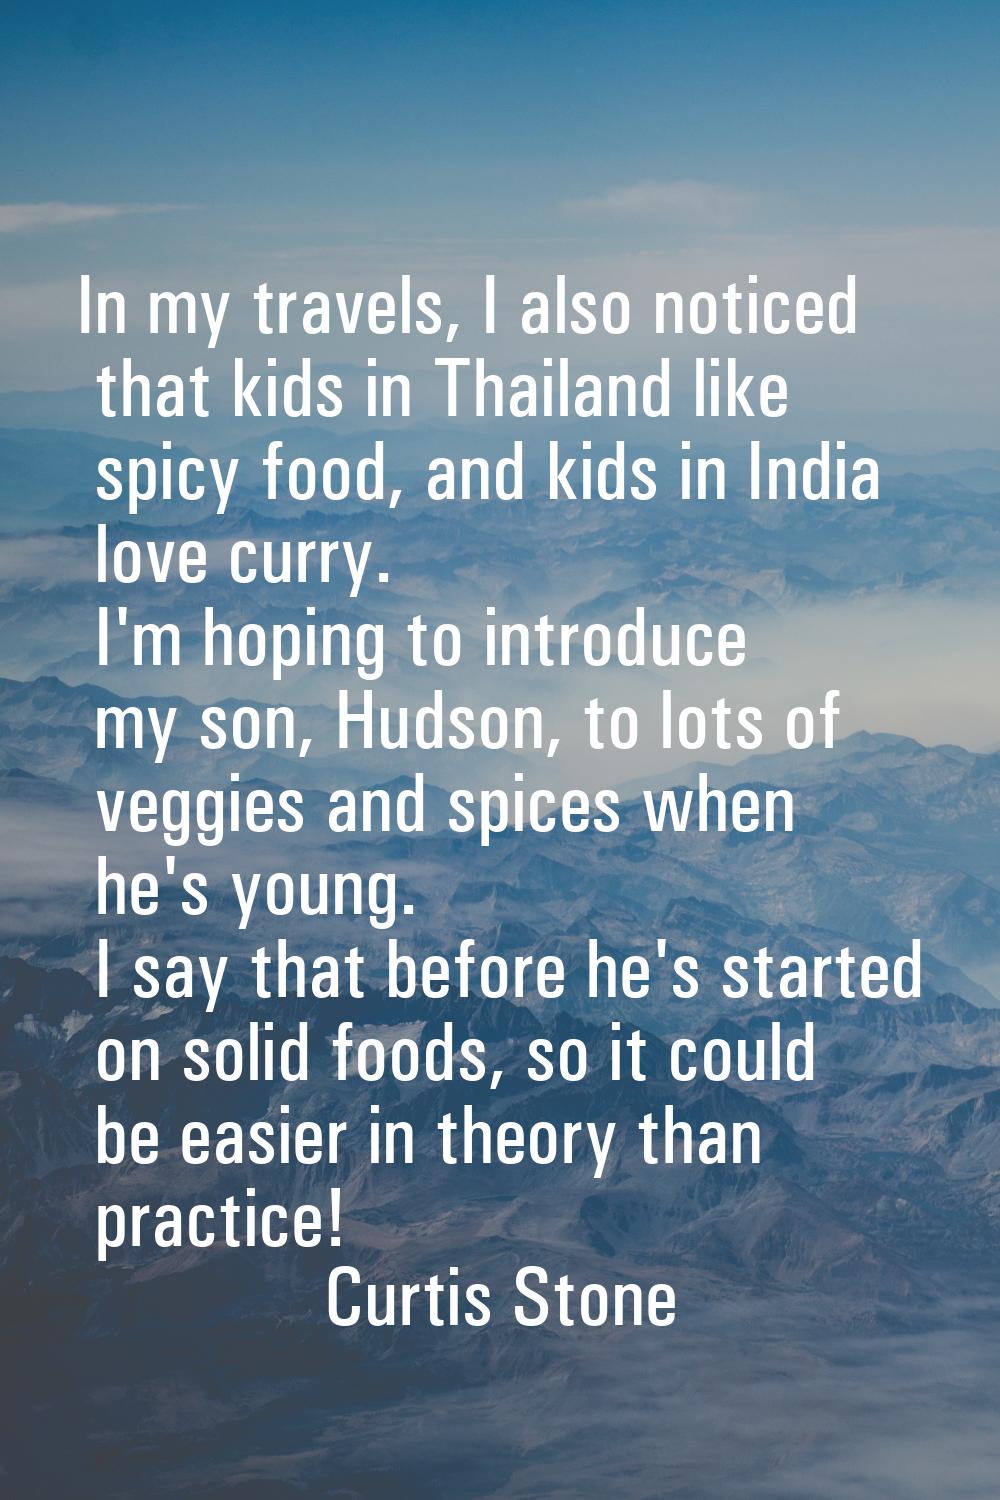 In my travels, I also noticed that kids in Thailand like spicy food, and kids in India love curry. 